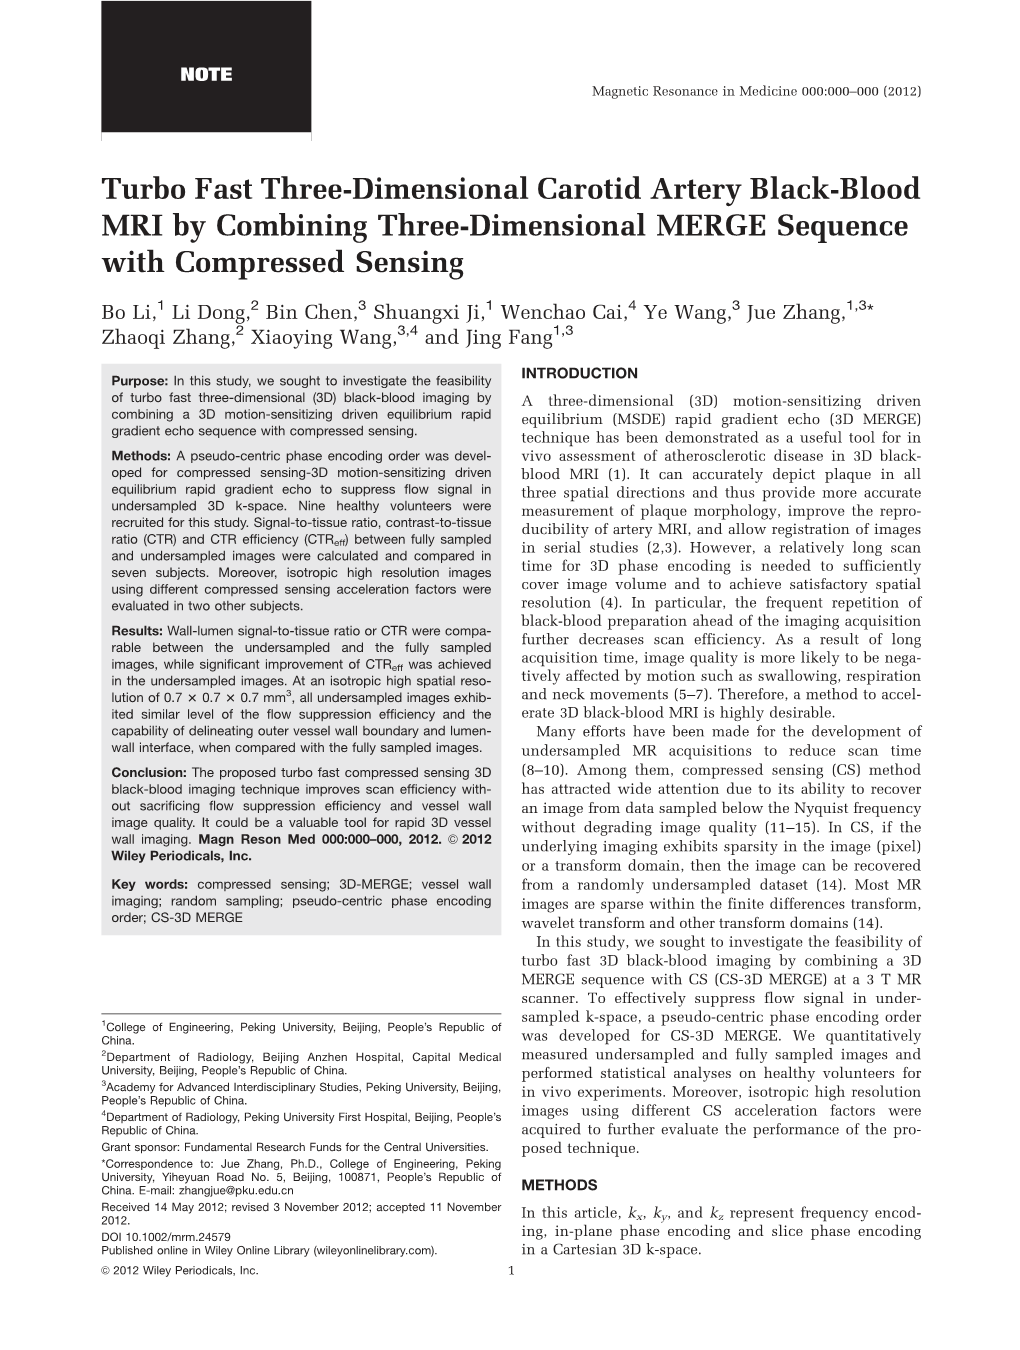 Turbo Fast Three-Dimensional Carotid Artery Black-Blood MRI by Combining Three-Dimensional MERGE Sequence with Compressed Sensing